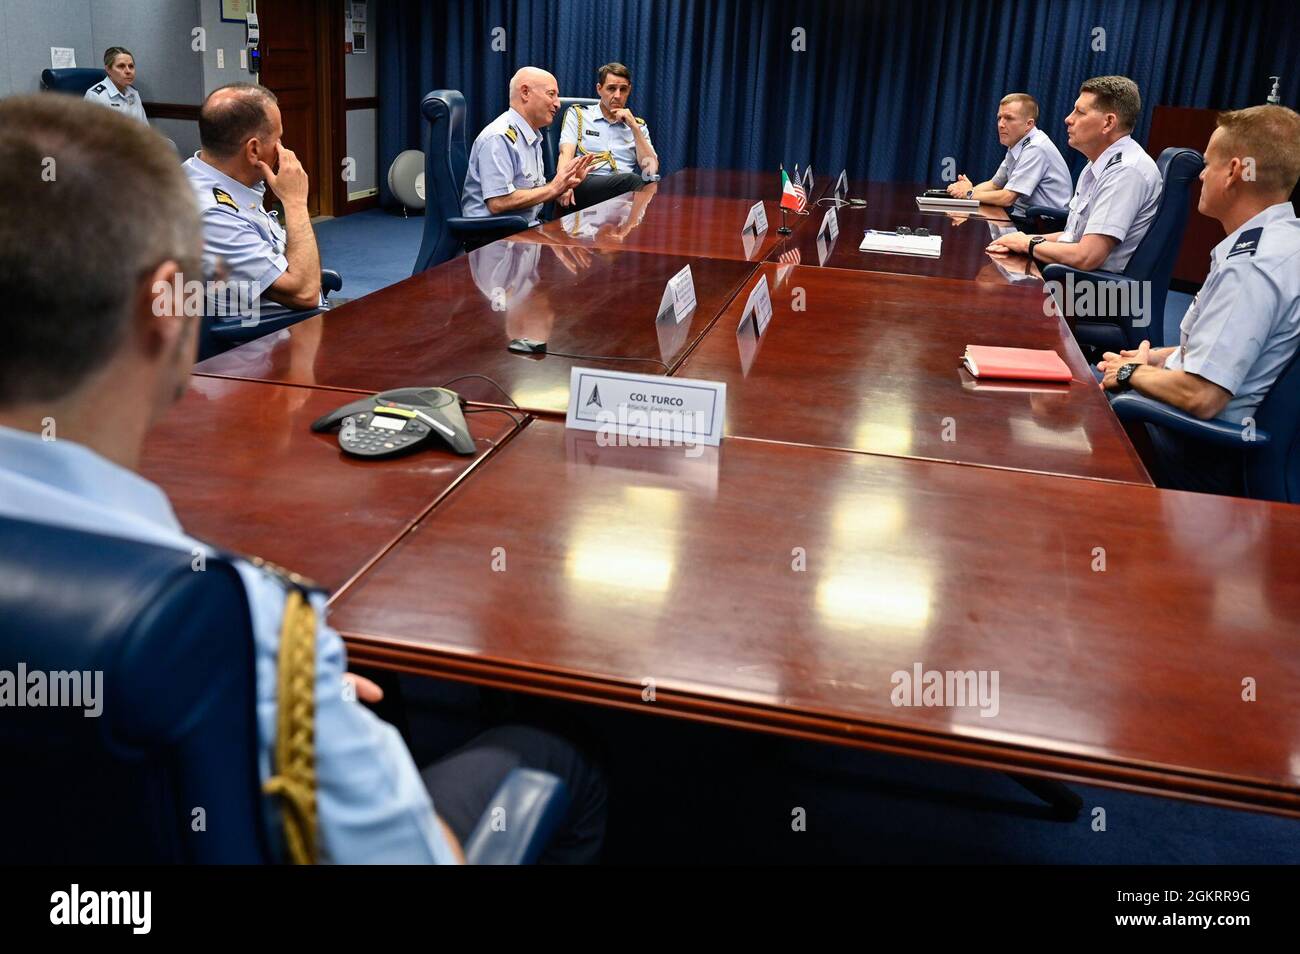 Lt. Gen. Luca Goretti, vice air chief of the Italian air force, speaks with Vice Chief of Space Operations Gen. David Thompson during a meeting at the Pentagon, Arlington, Va., June 23, 2021. Goretti and Thompson discussed bilateral space cooperation between their military services. Stock Photo